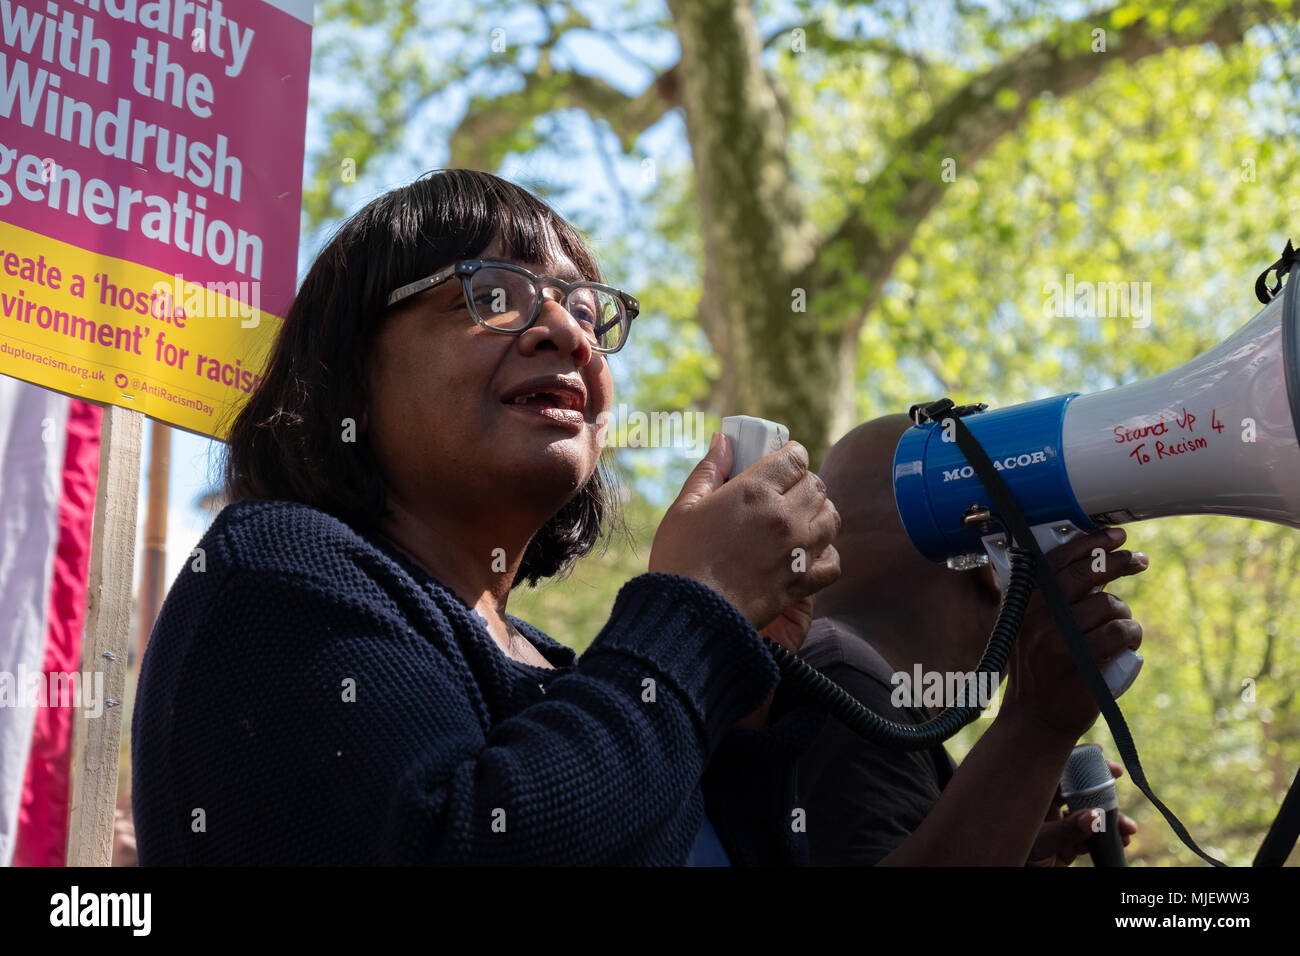 London, UK, 5th May 2018, Demonstrators attend a march for Windrush opposite Downing Street in an attempt to overturn the governments immigration policy stating Theresa May's current policy is racist. Diane Abbott MP gives a speech to the attendees Credit: adrian looby/Alamy Live News Stock Photo